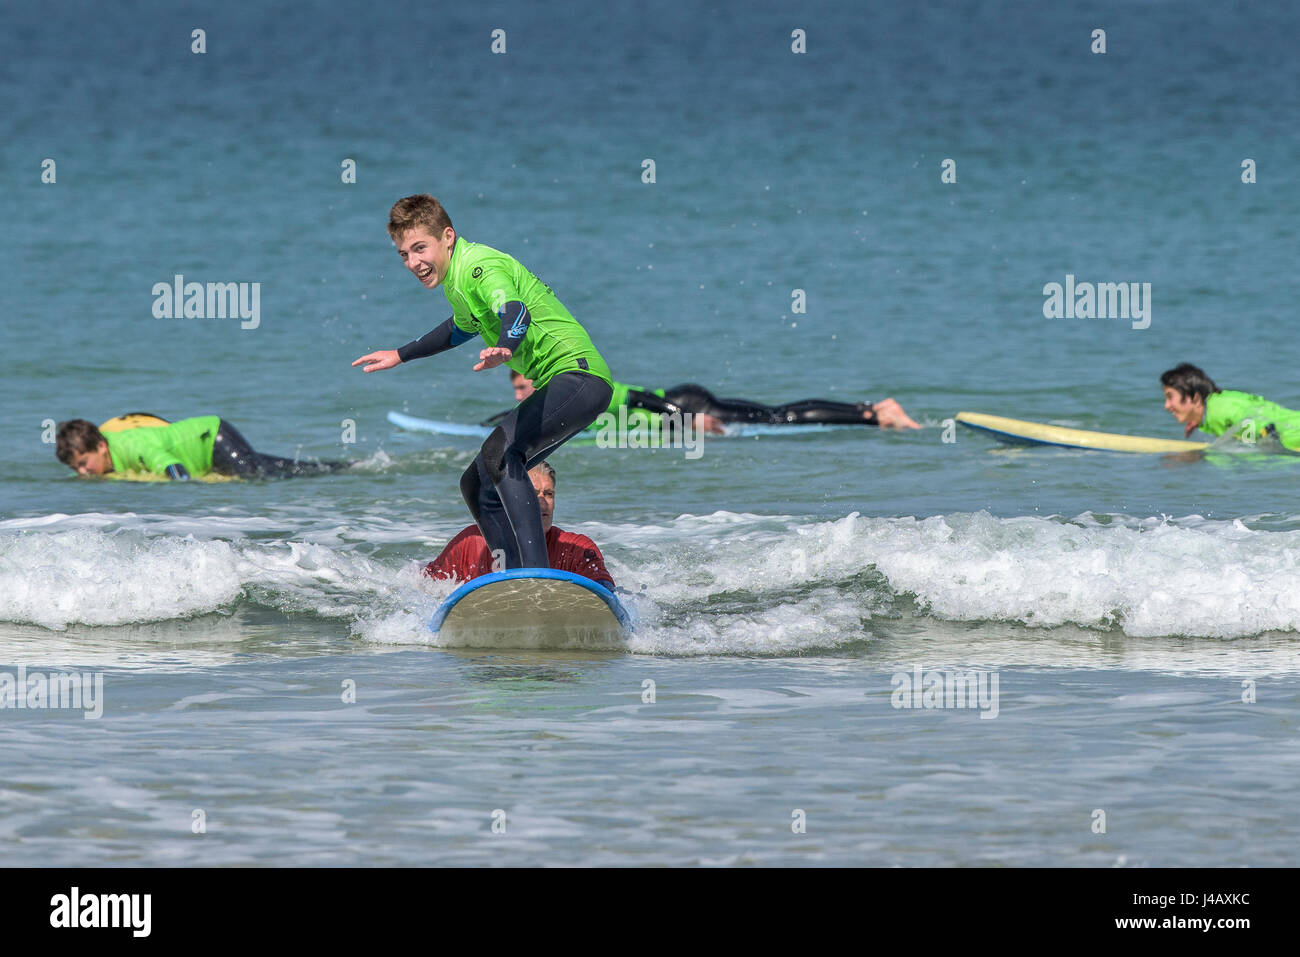 A surf school novice surfs for the first time Fistral Beach Newquay Cornwall Surfing Surfer Learner Learning Seaside Sea Tourism Stock Photo